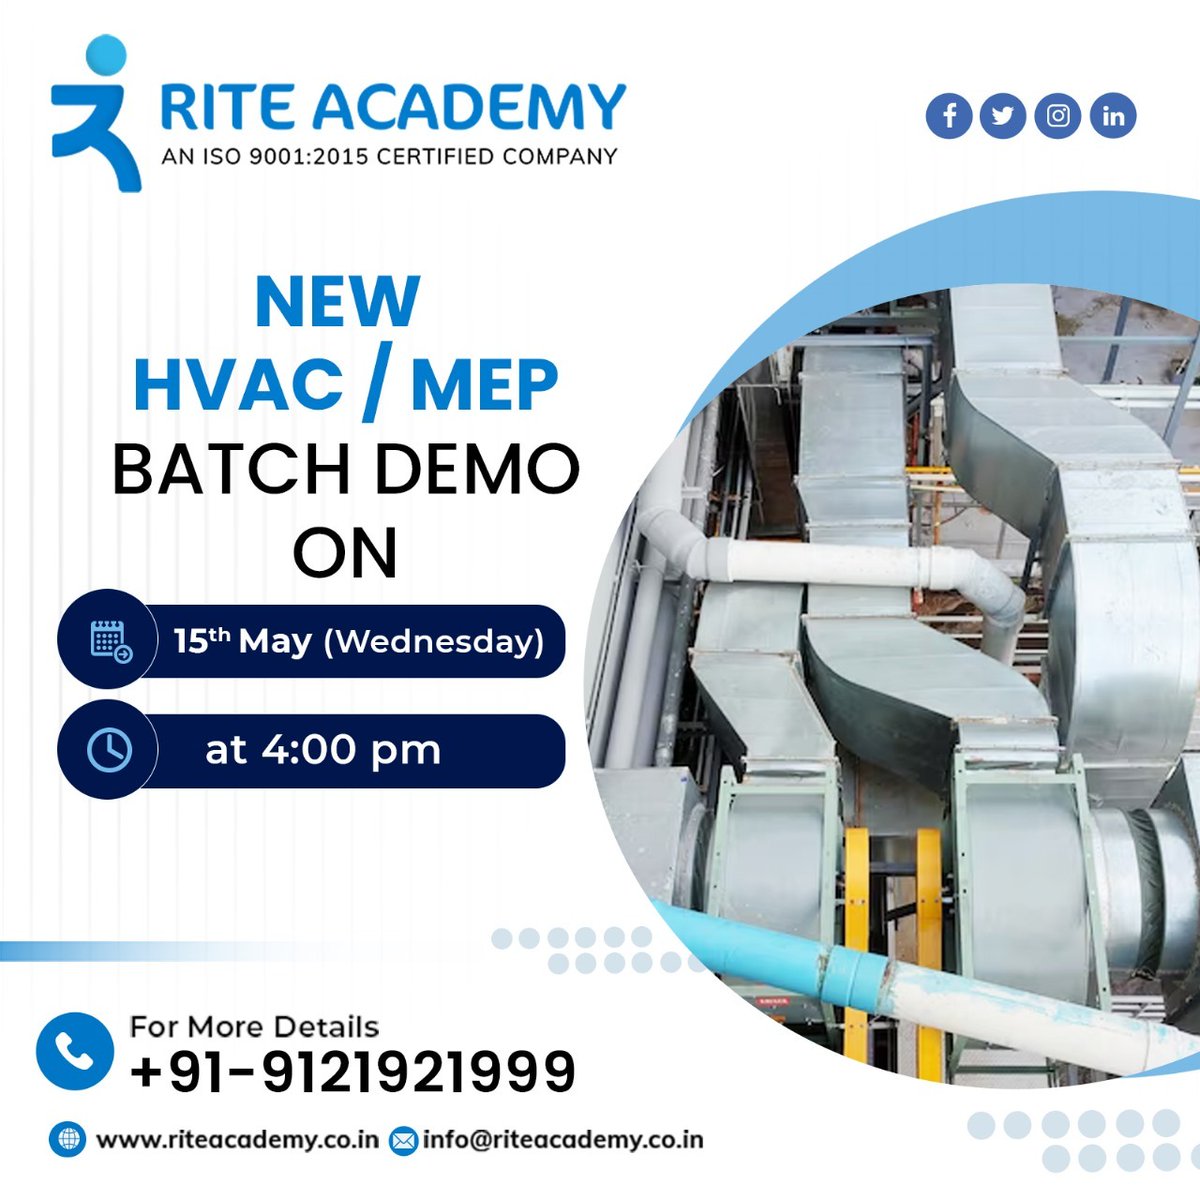 Calling all aspiring for the Best HVAC/MEP training in #Hyderabad! 🔧 

Discover our industry-leading program and get personalized doubt-clearing sessions on May 15th at 4:00 PM.  🔧

#mep #mepcourse #riteacademy #onlinemeptraining  #meptraining #hvac #hvactechnician #hvaccourse